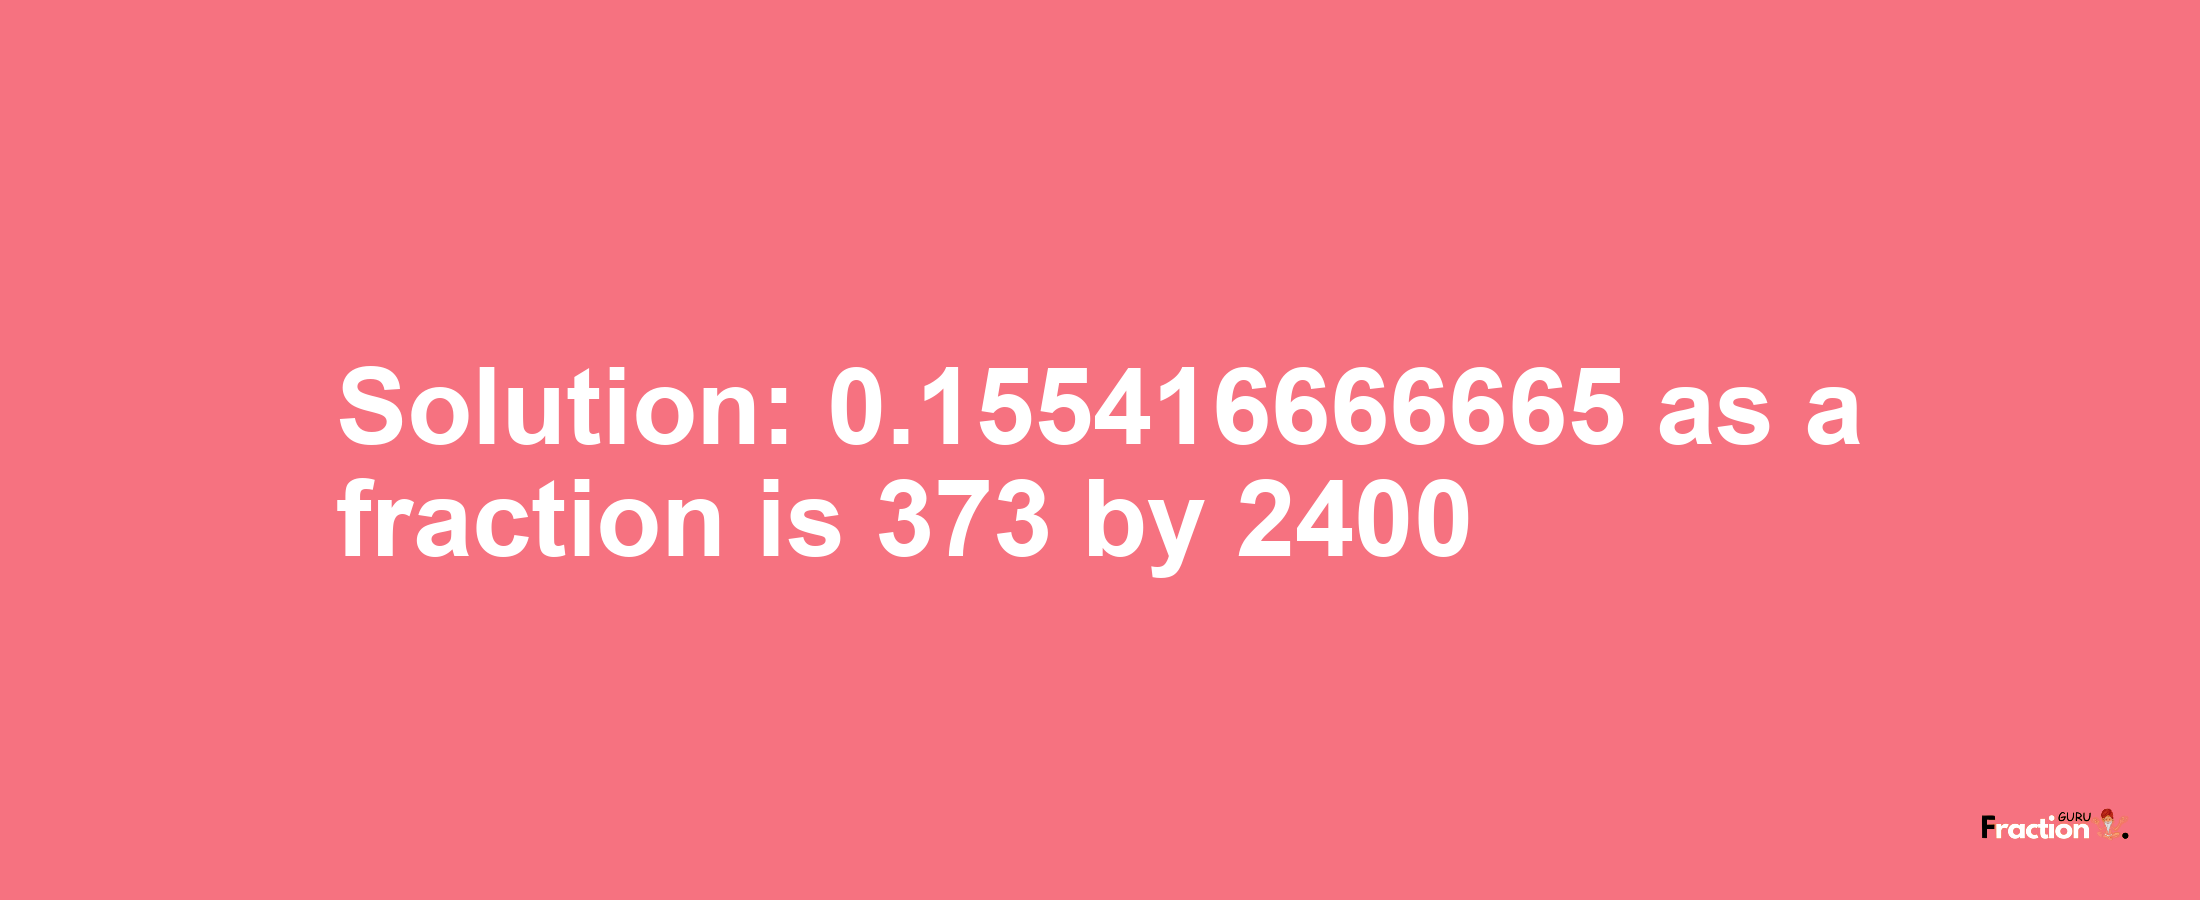 Solution:0.155416666665 as a fraction is 373/2400